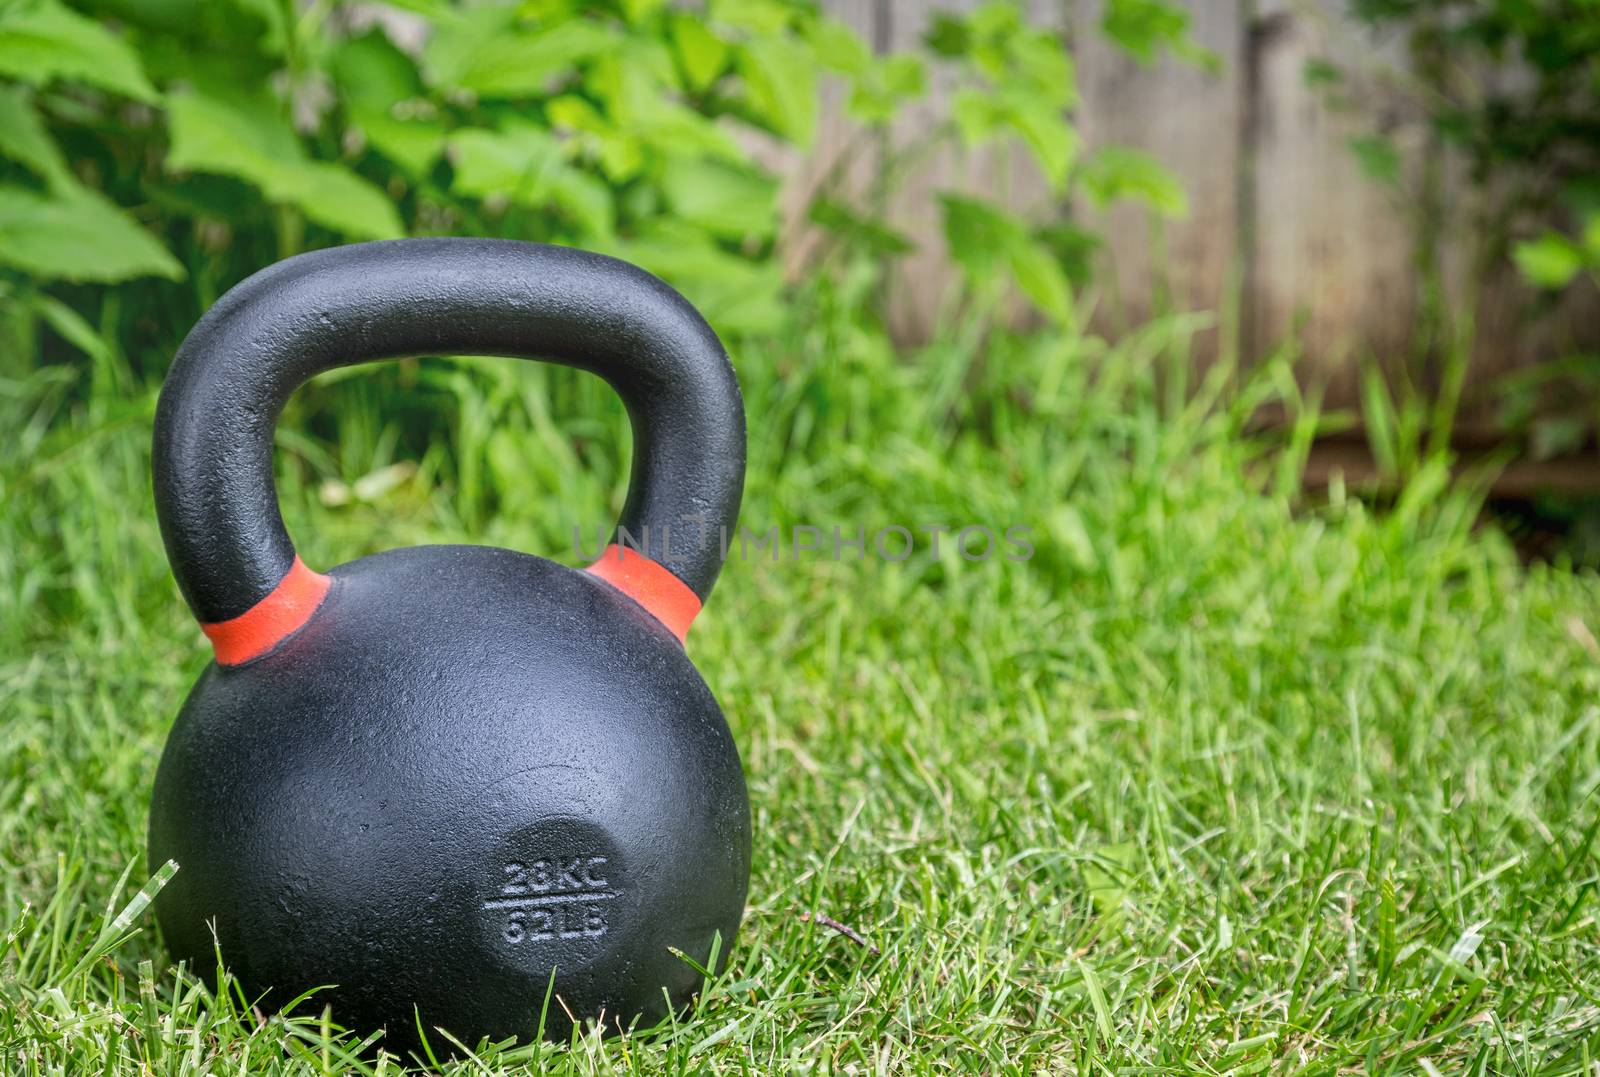 heavy iron competition kettlebell (62lb - 28 kg) on green grass in a backyard - outdoor fitness concept